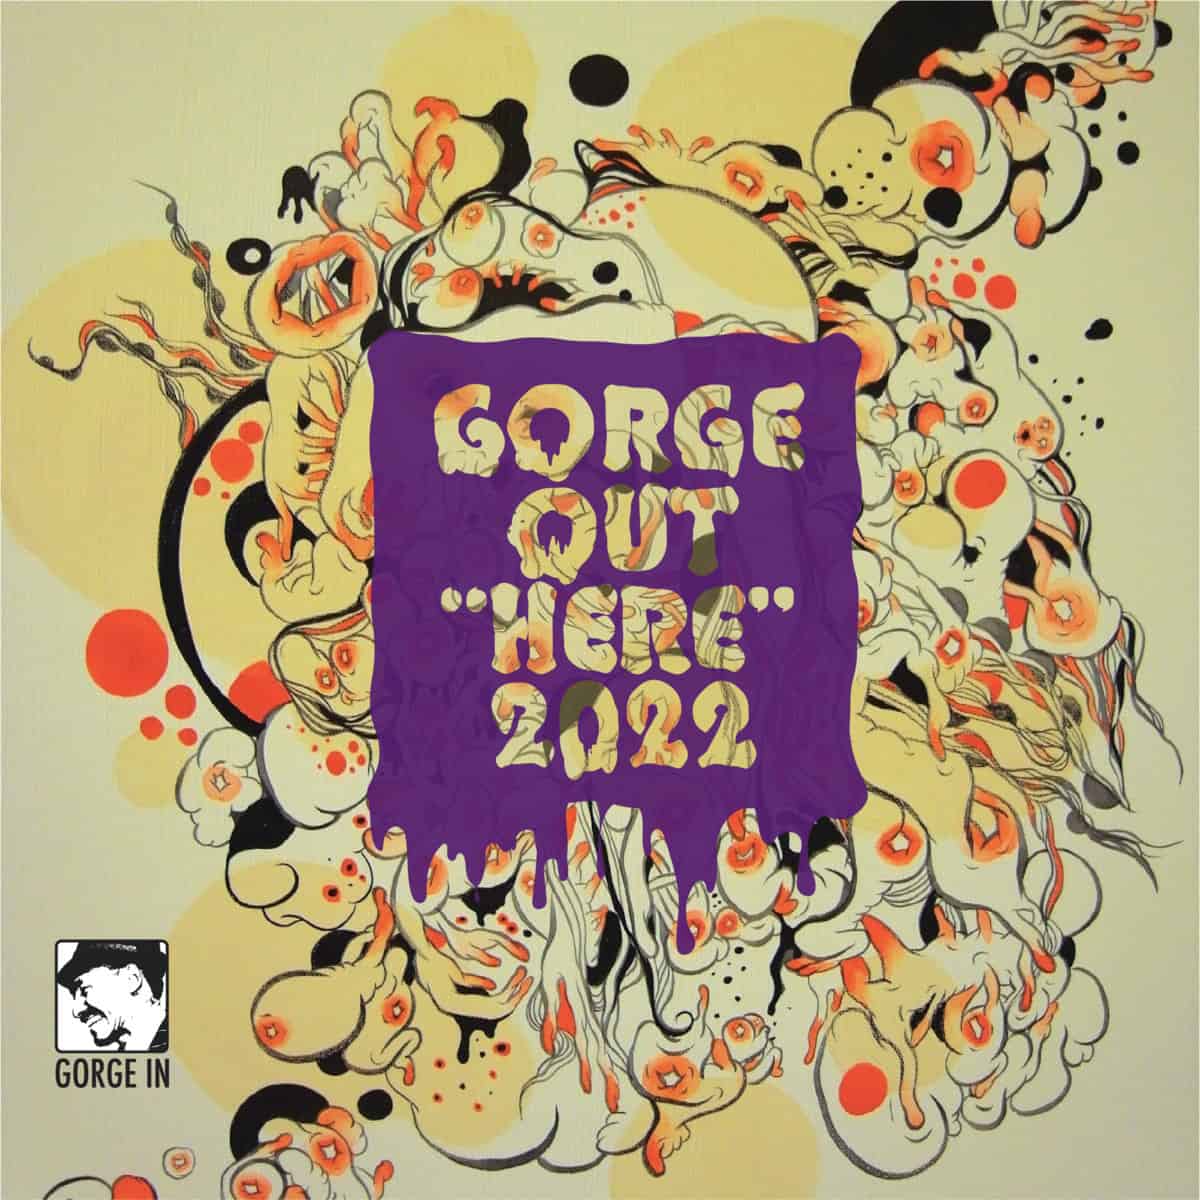 GORGE OUT “HERE” 2022 [RELEASE]